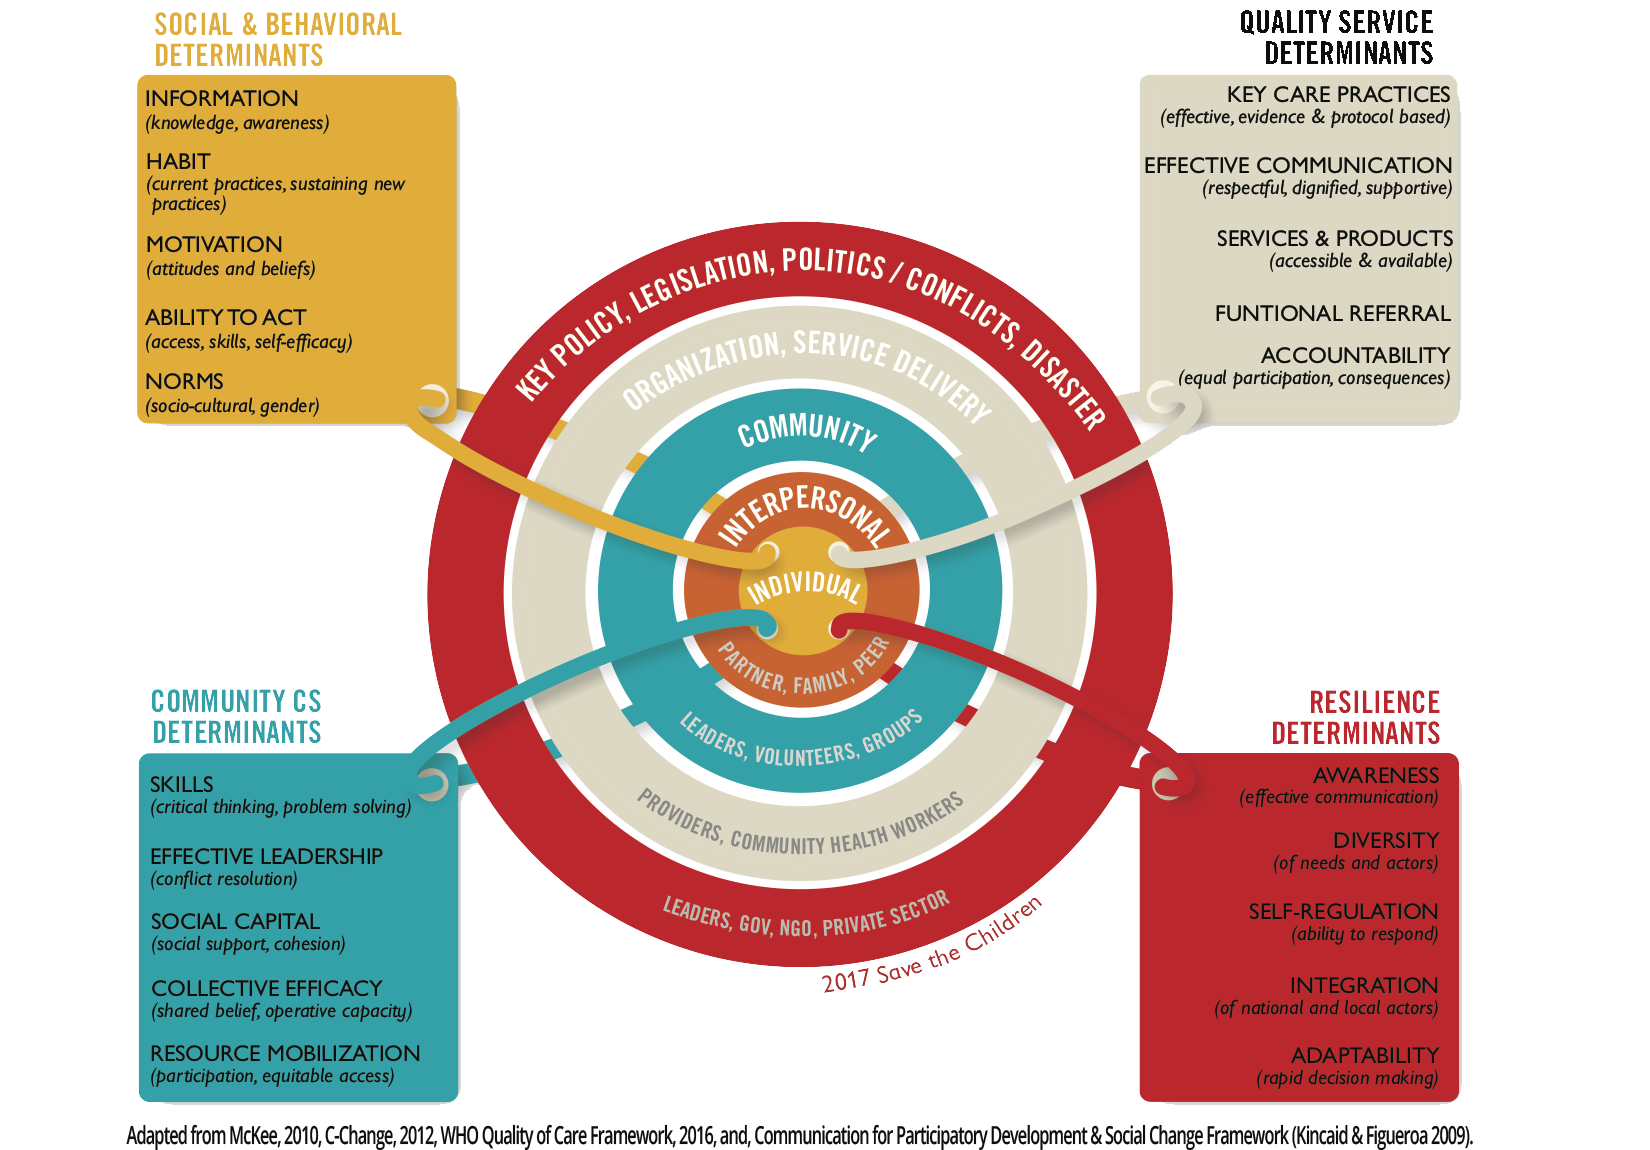 Adapted from McKee, 2010, C-Change, 2012, WHO Quality of Care Framework, 2016, and, Communication for Participatory Development & Social Change Framework (Kincaid & Figueroa 2009).